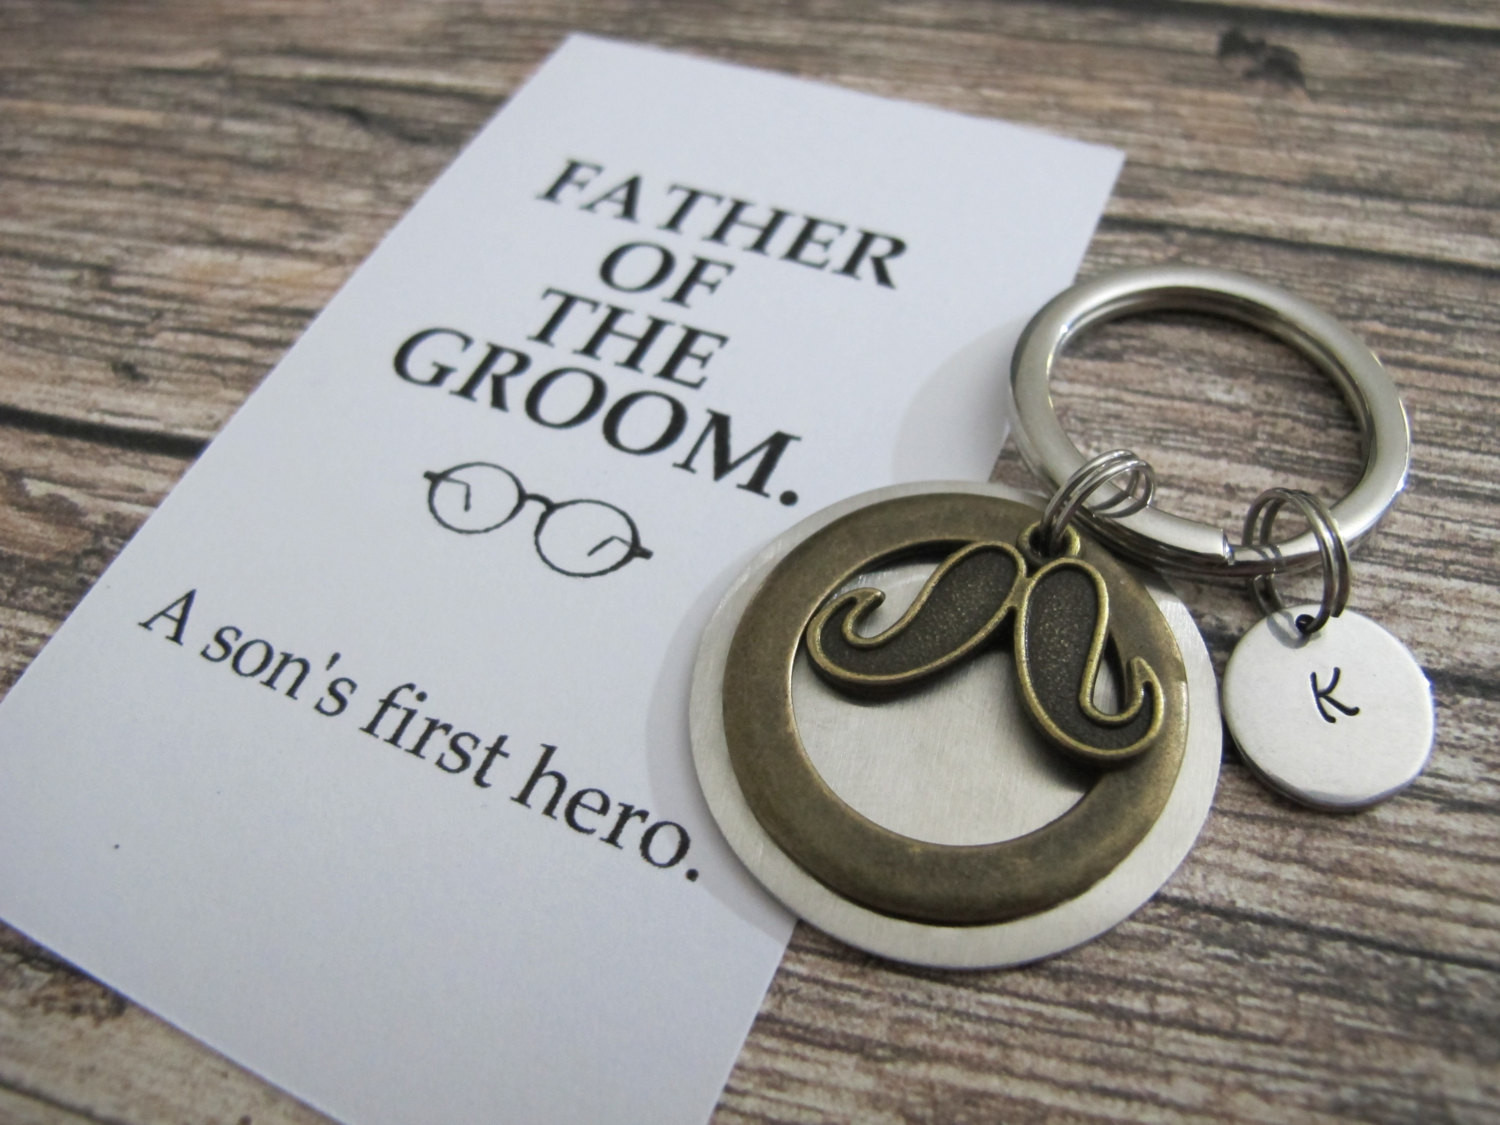 Father And Son Gift Ideas
 FATHER of the GROOM t PERSONALIZED keychain a son s